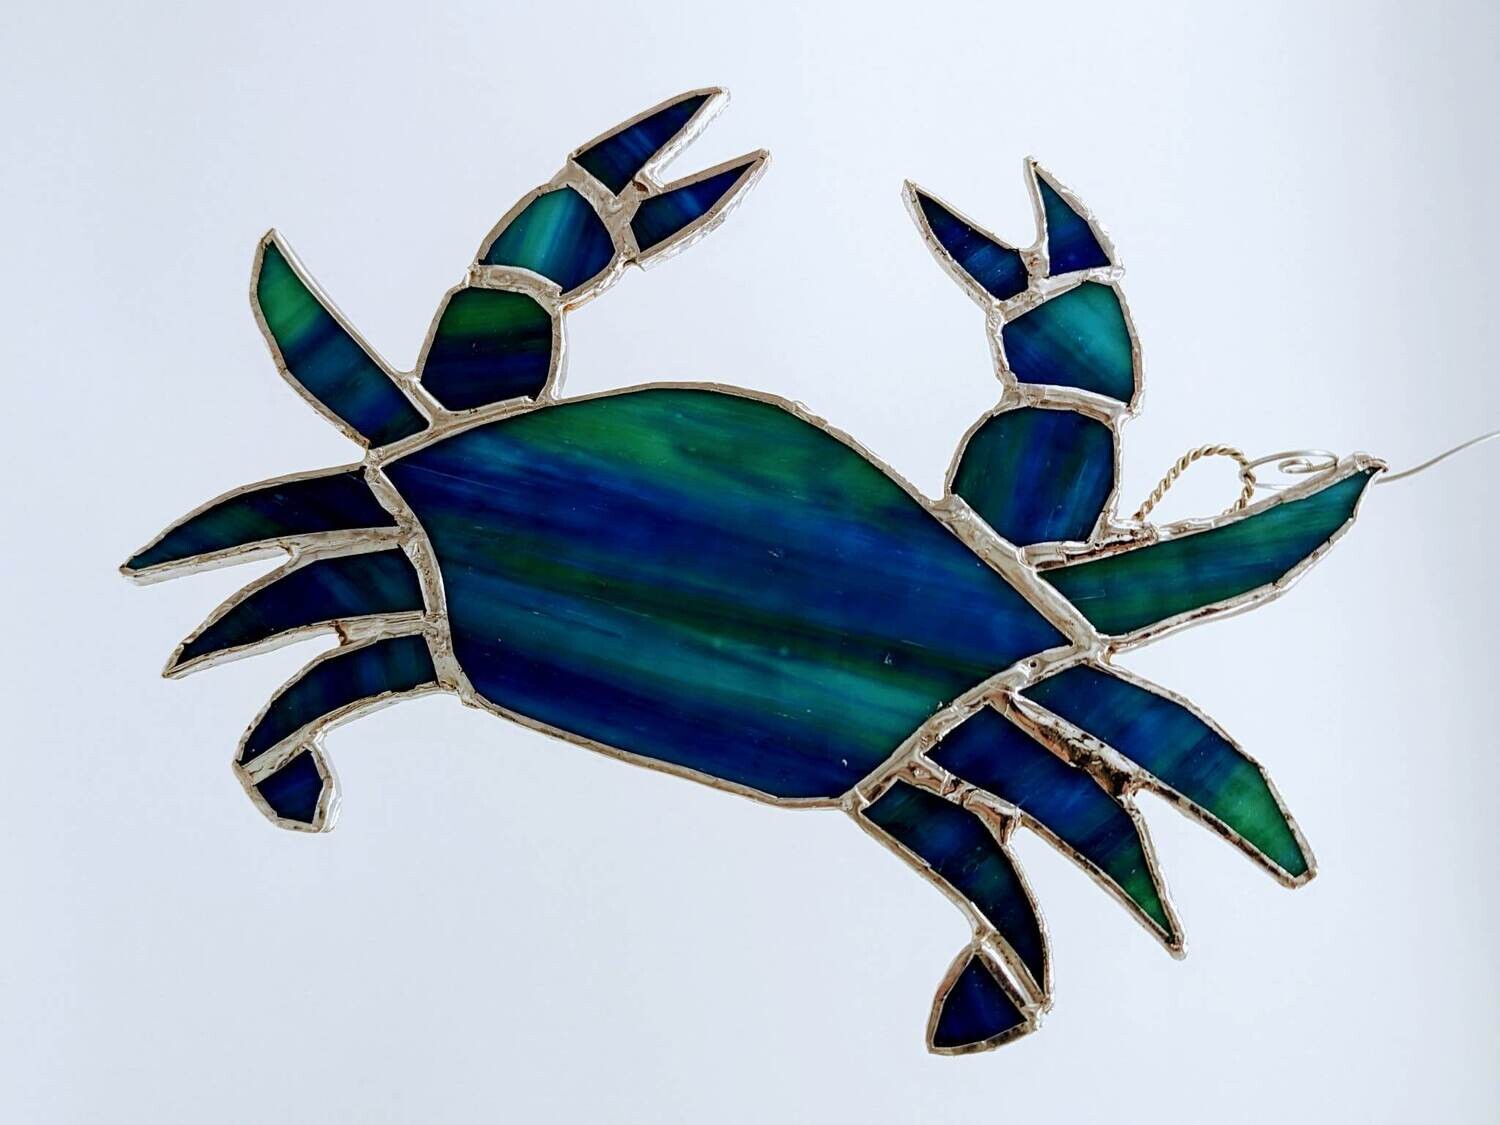 Blue Crab Stained Glass*July 8th*12pm